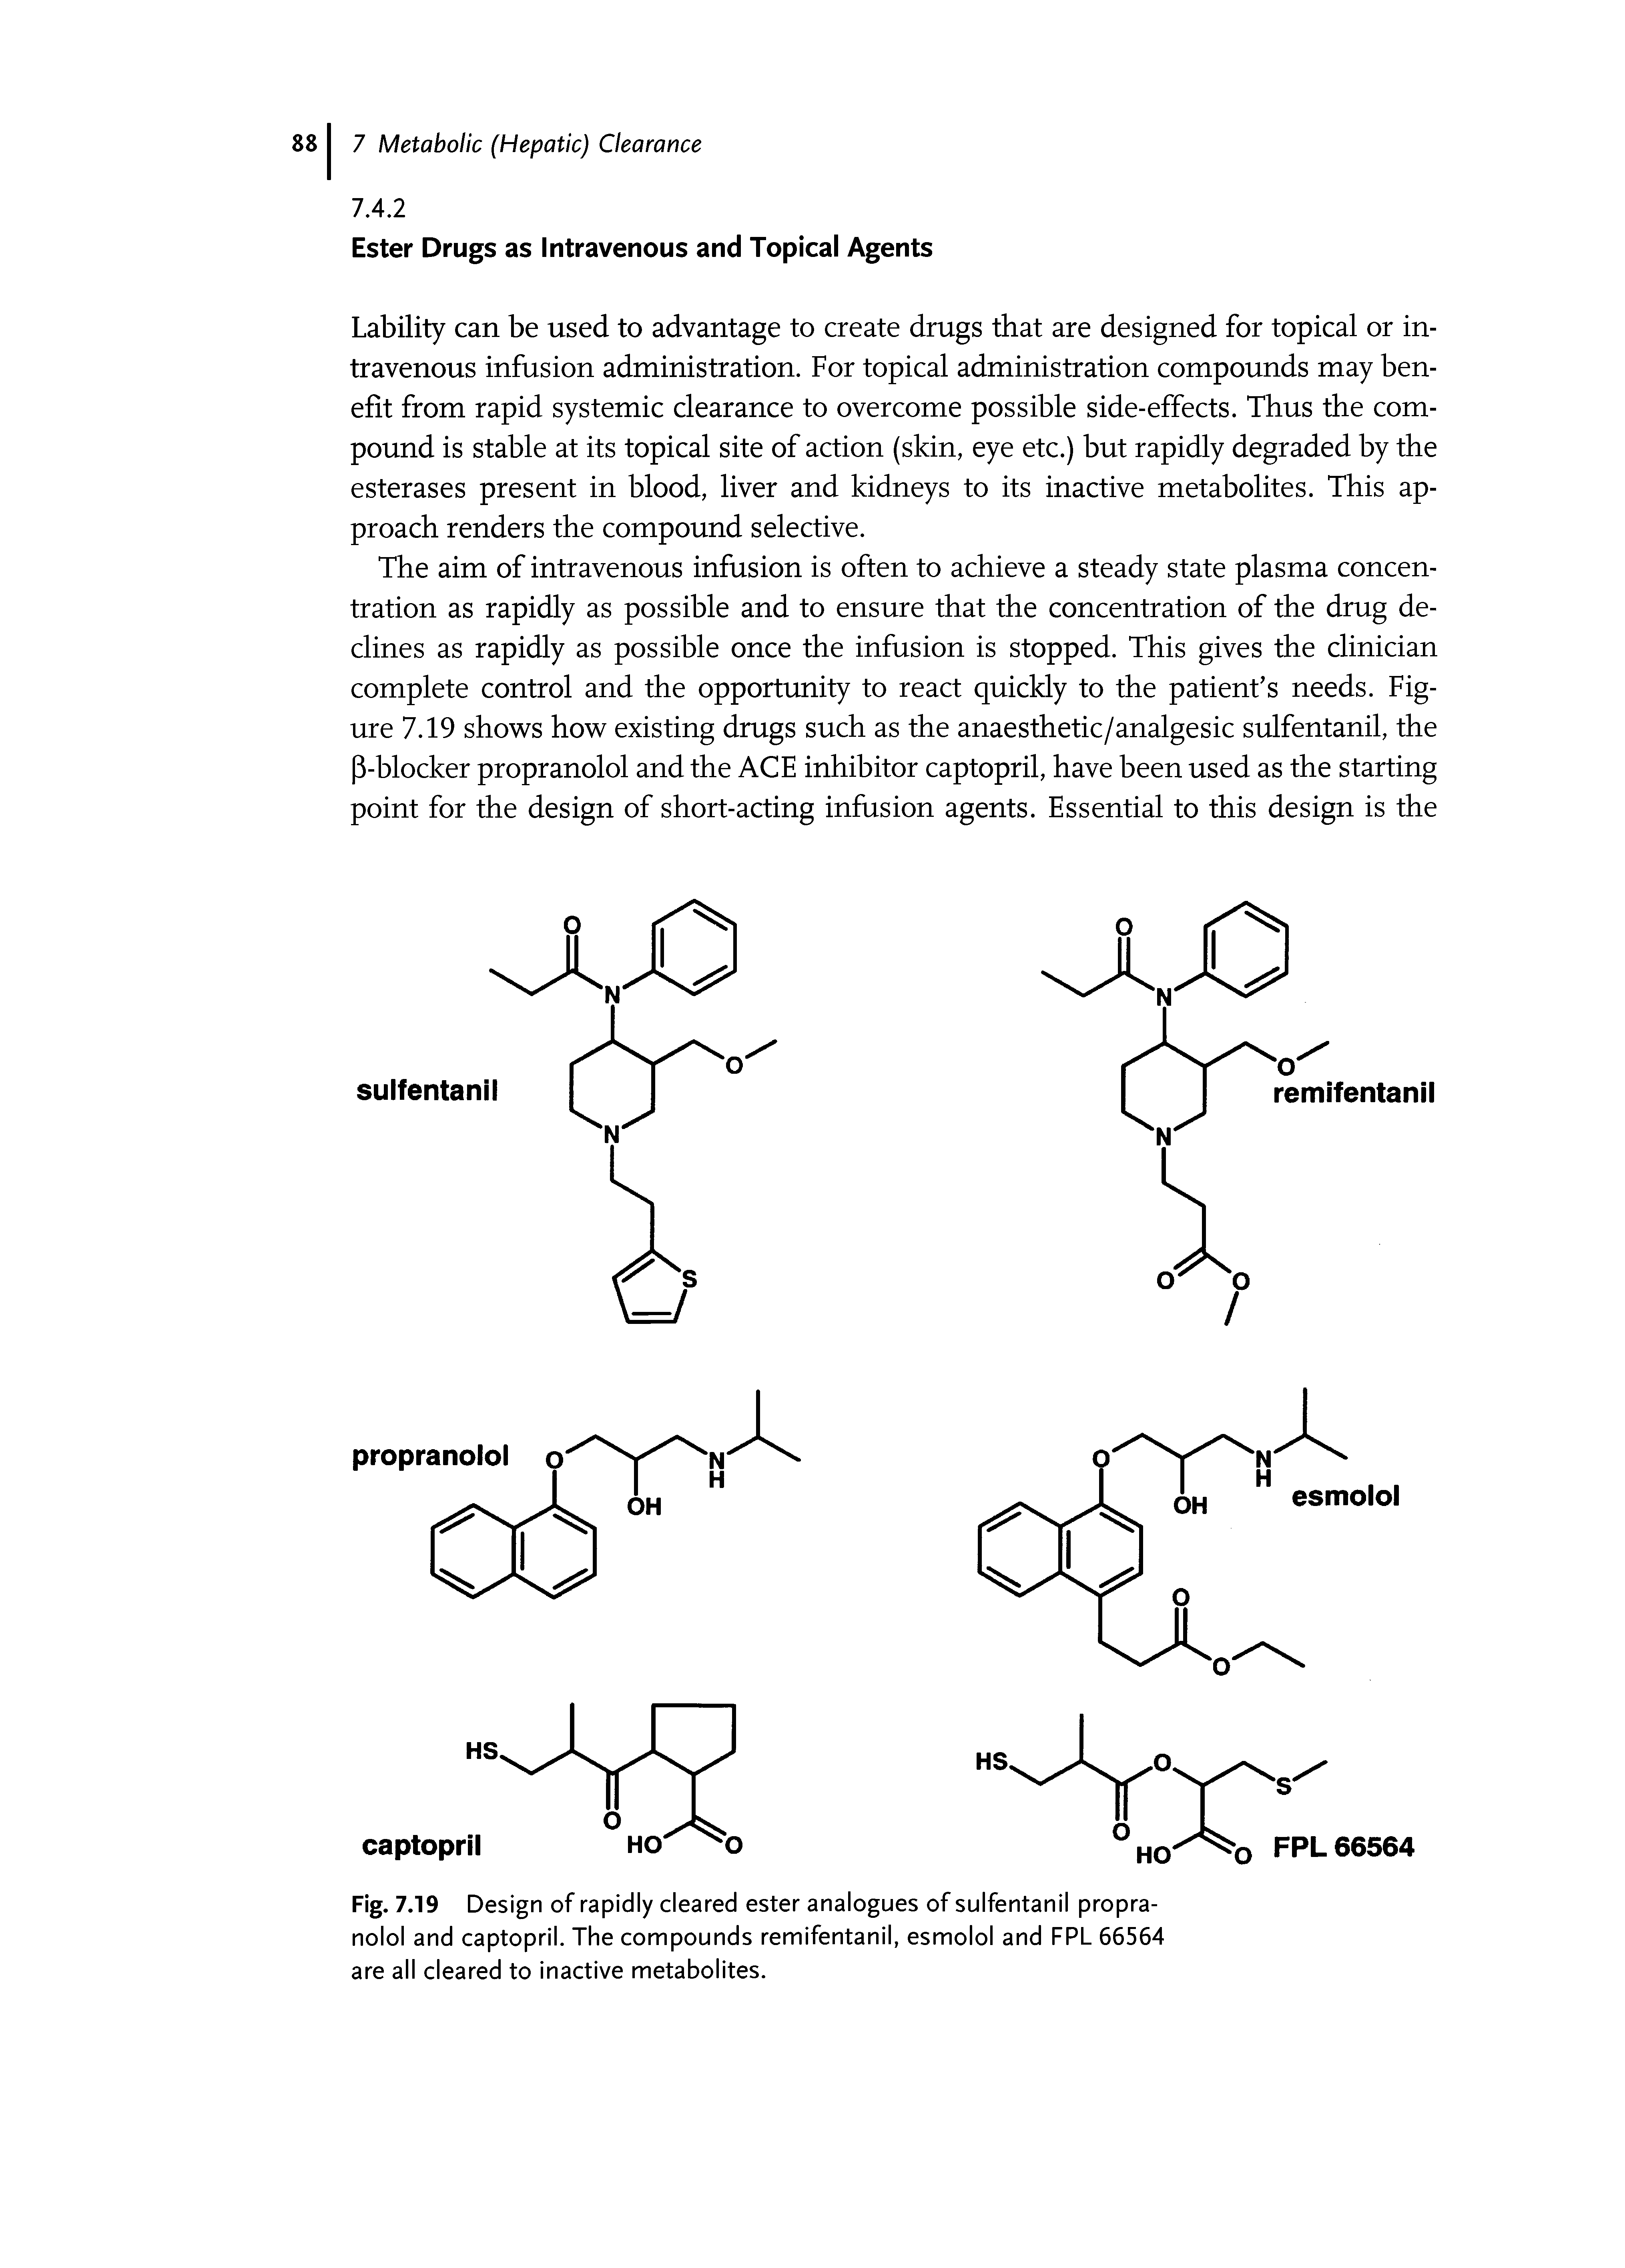 Fig. 7.19 Design of rapidly cleared ester analogues of sulfentanil propranolol and captopril. The compounds remifentanil, esmolol and FPL 66564 are all cleared to inactive metabolites.